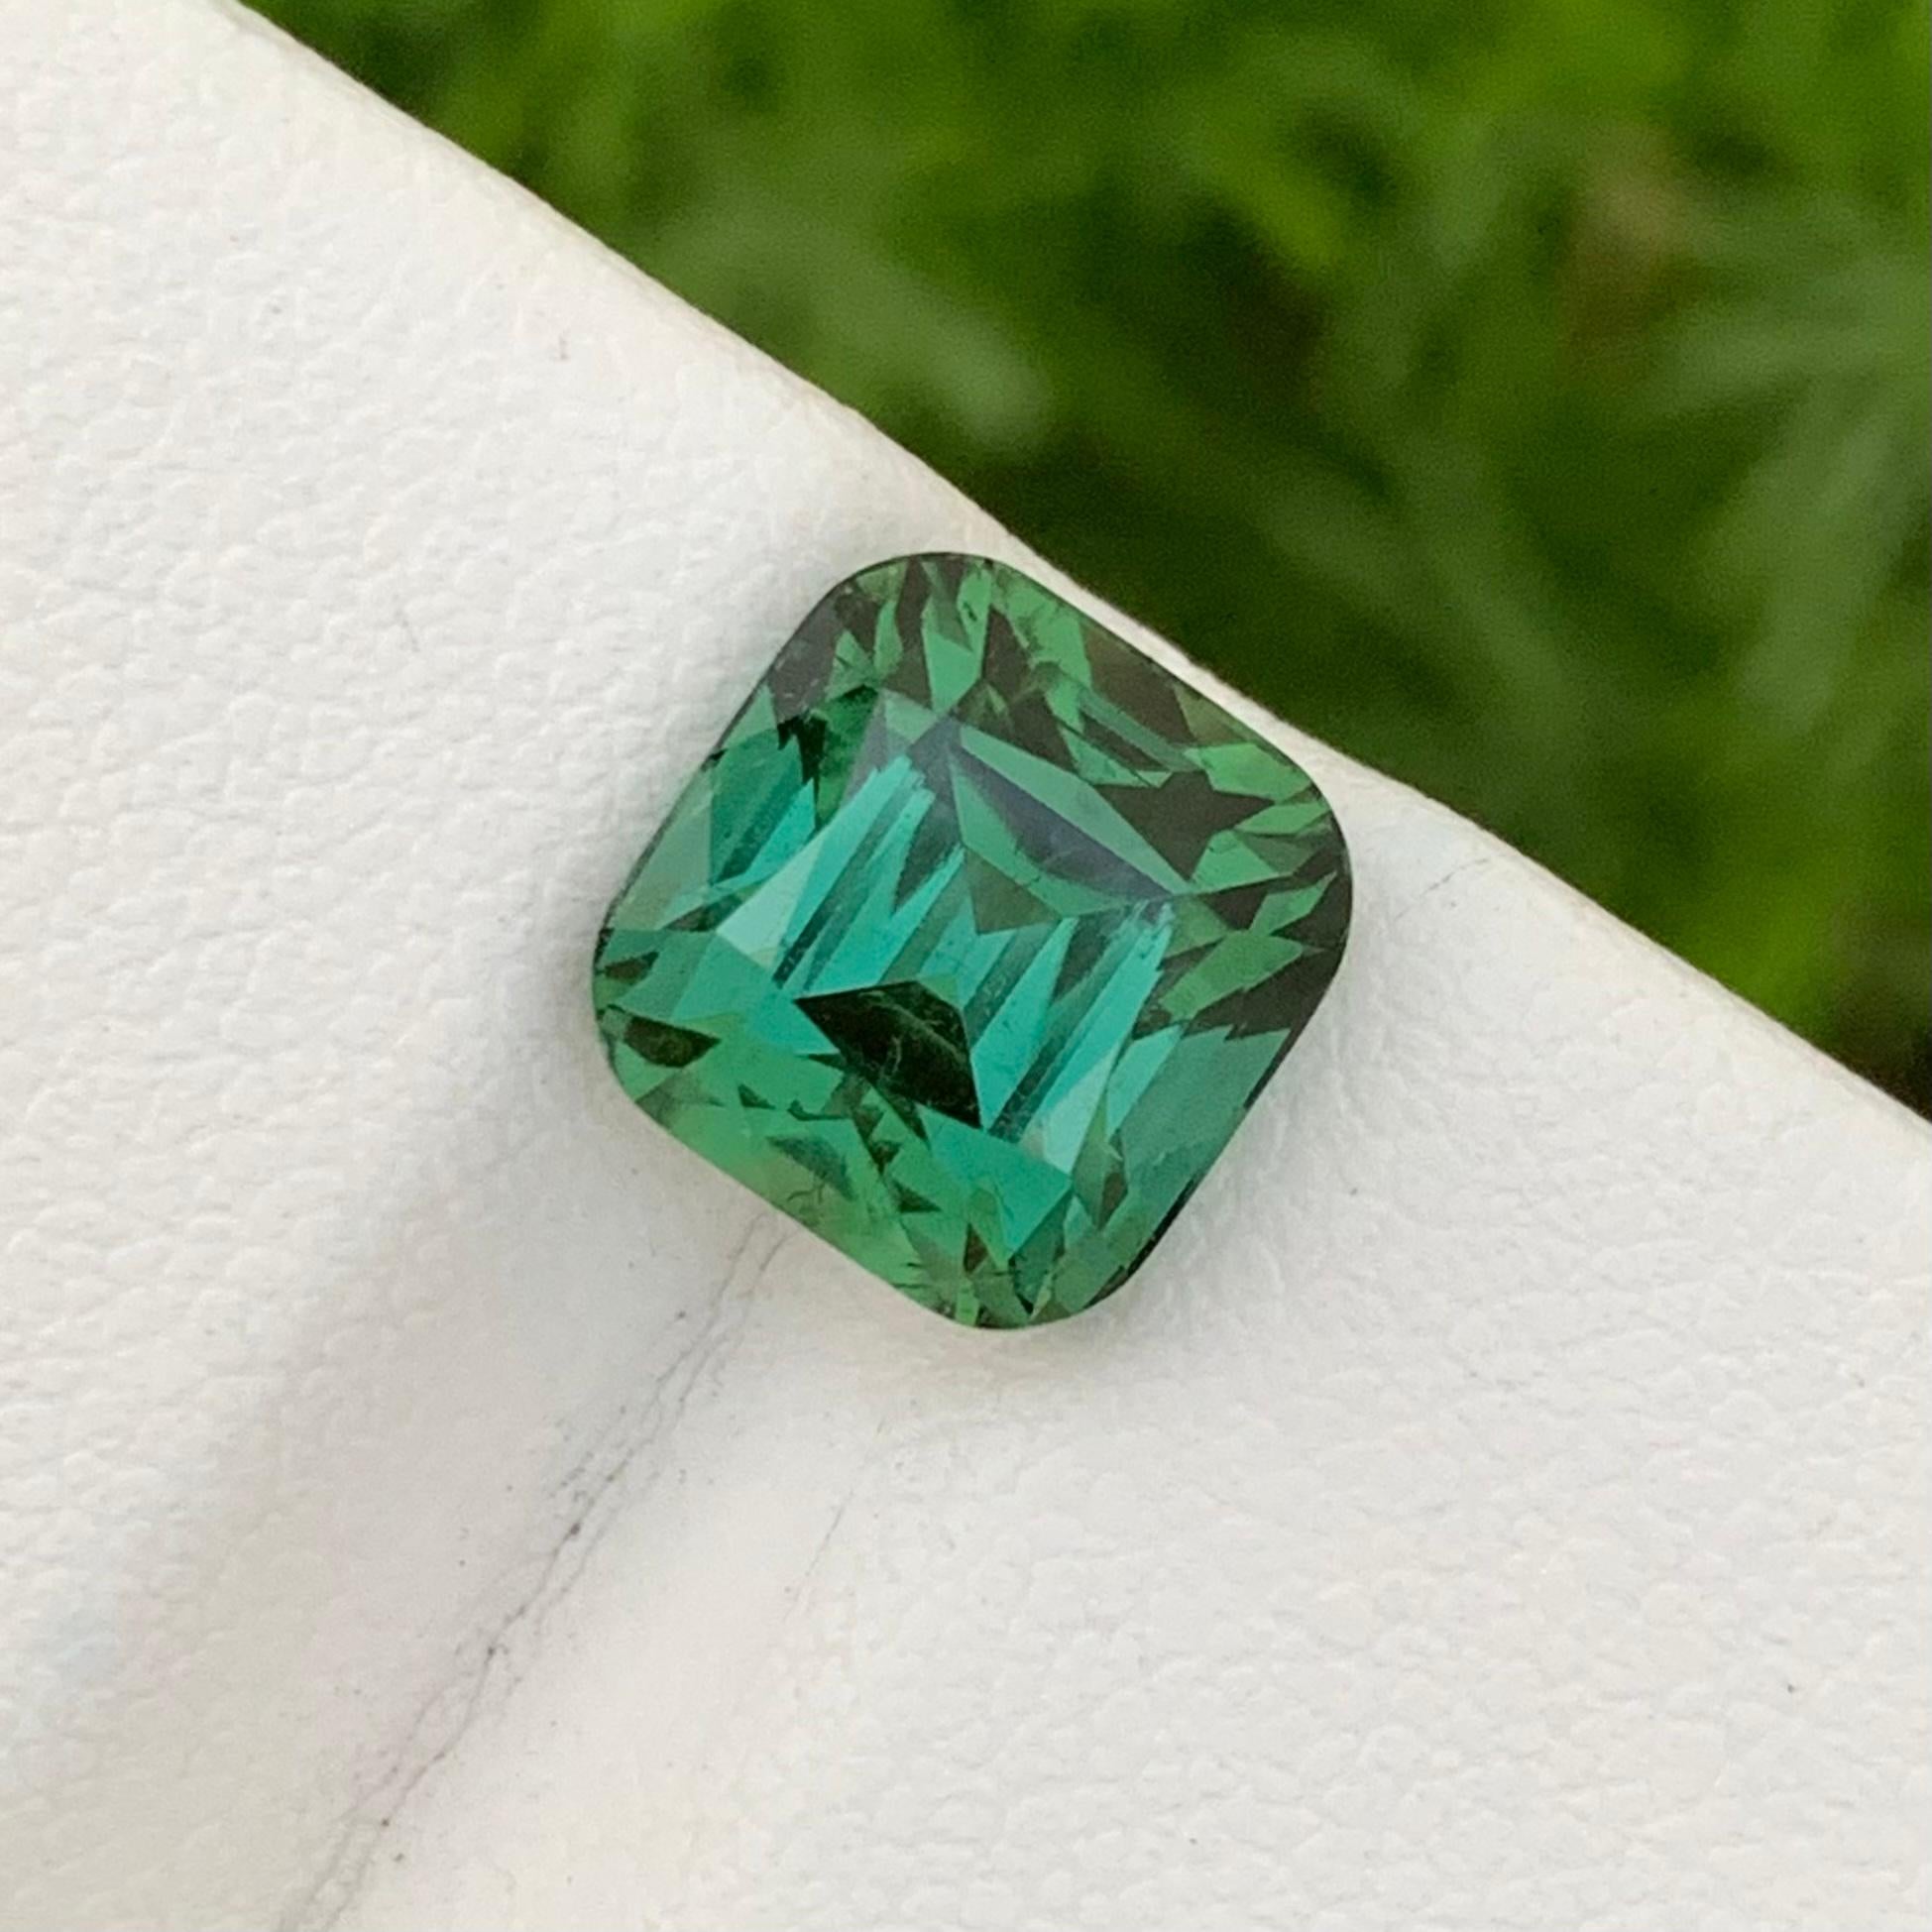 Faceted Tourmaline 
Weight: 4.80 Carats 
Dimension: 8.9x8.7x7.8 Mm 
Origin: Afghanistan 
Color: Blueish Green 
Shape: Cushion Cut
Treatment: Non
Certificate: On Customer Demand 
.
Lagoon tourmaline, also known as 